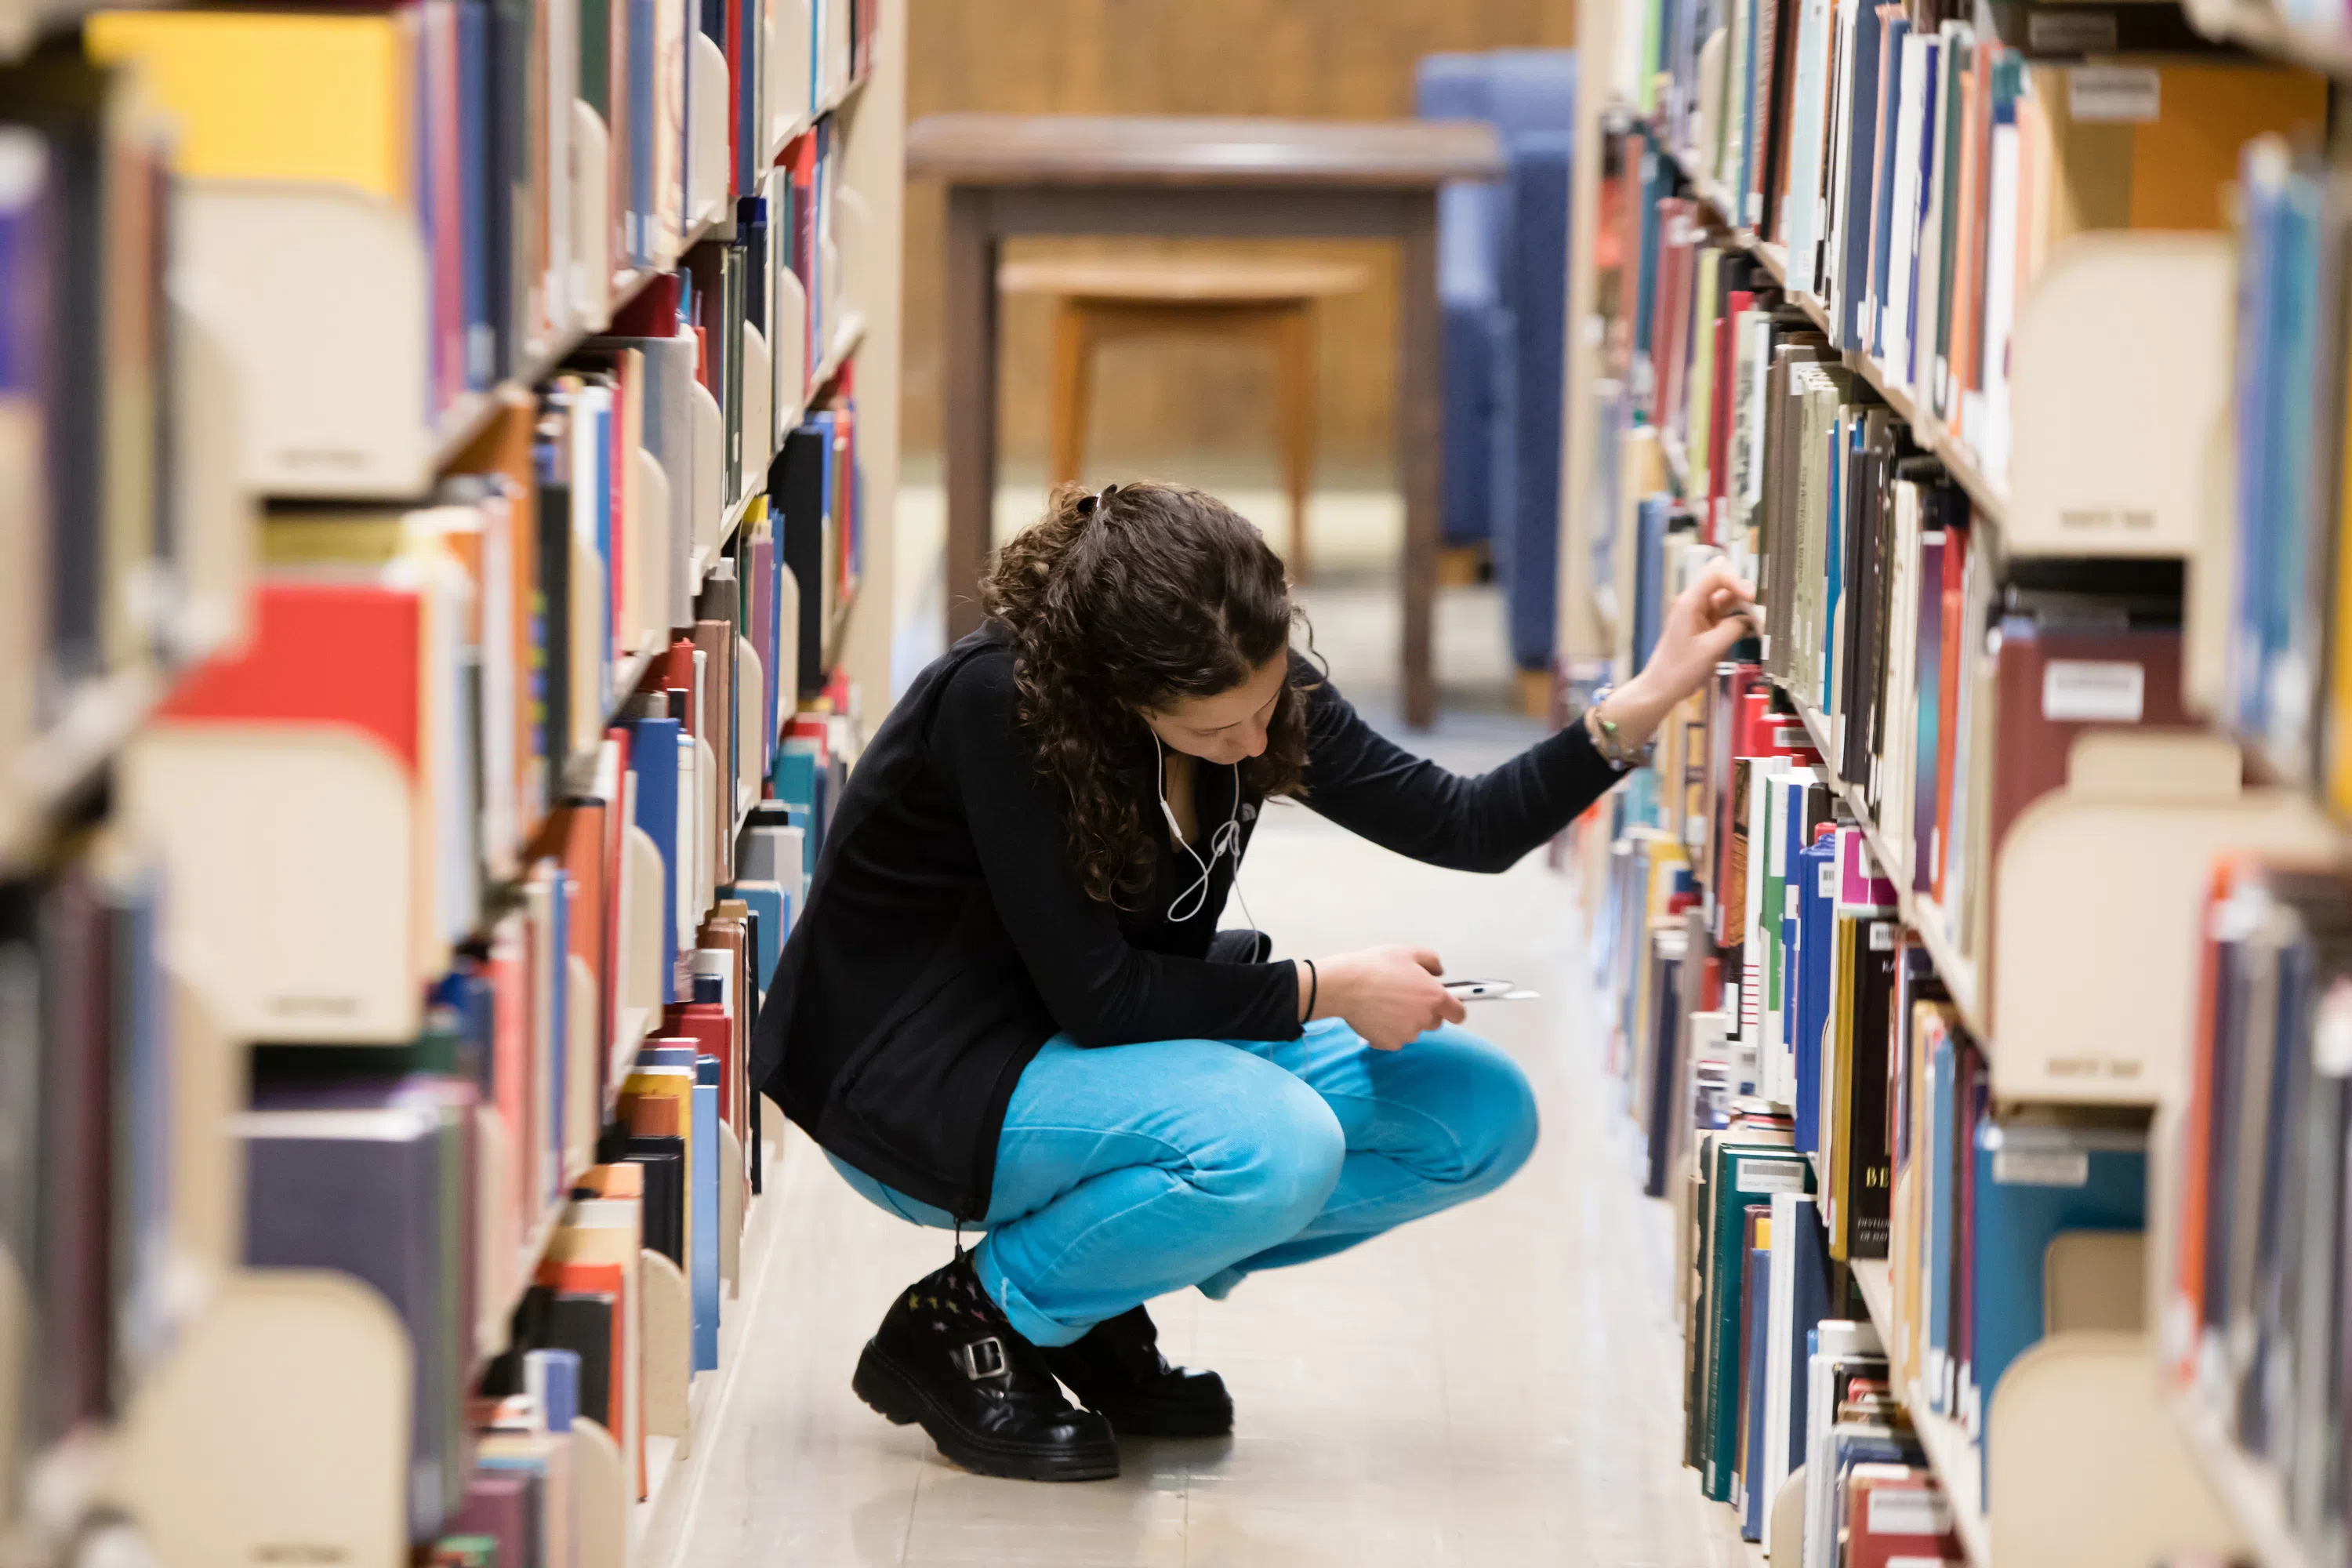 Student squatting down in aisle of book stacks looking for a book.